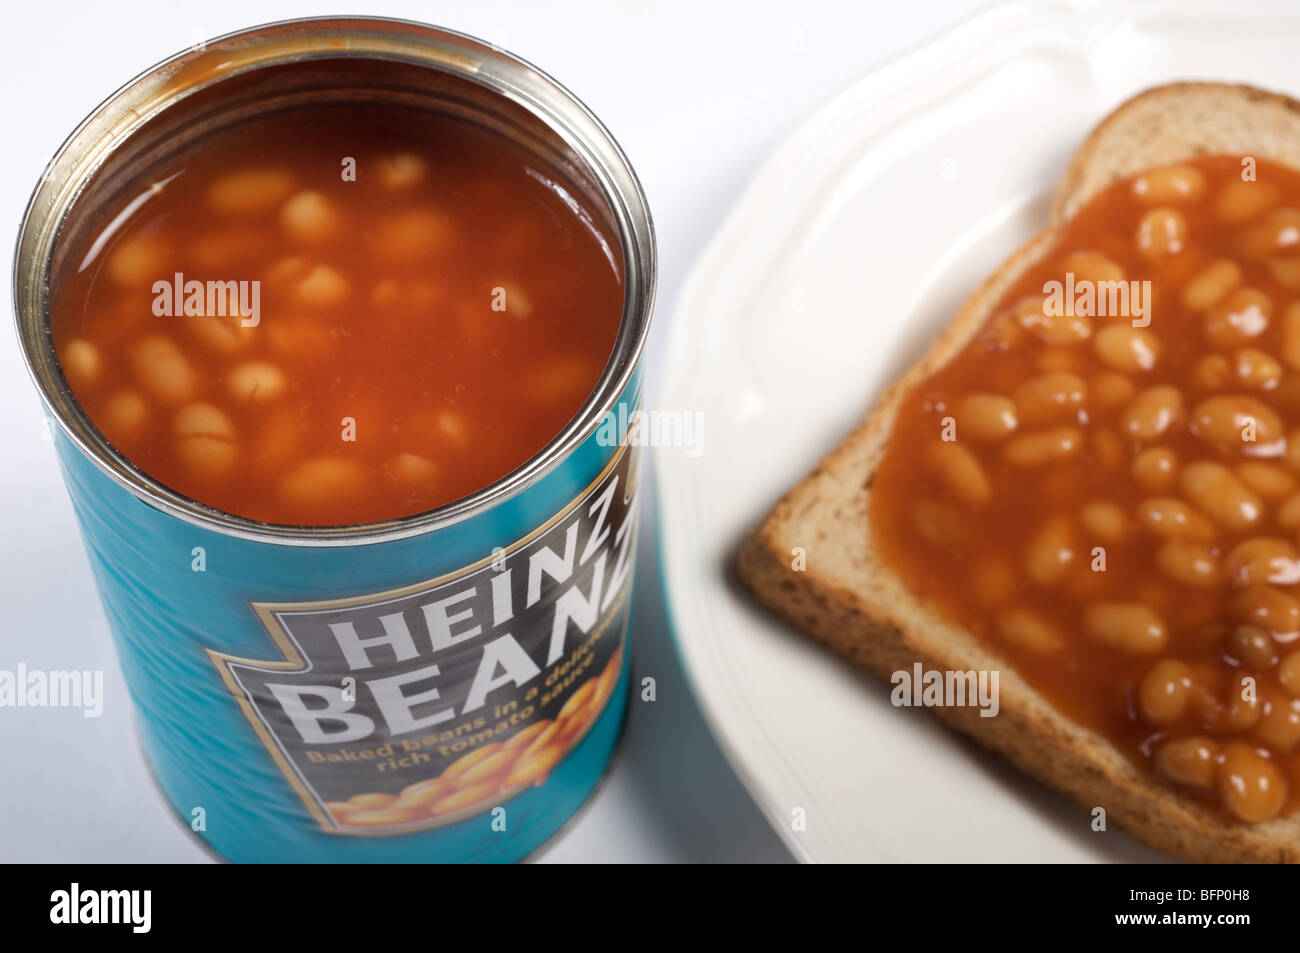 Heinz baked beans on toast, a traditional snack food in Great Britain Stock Photo